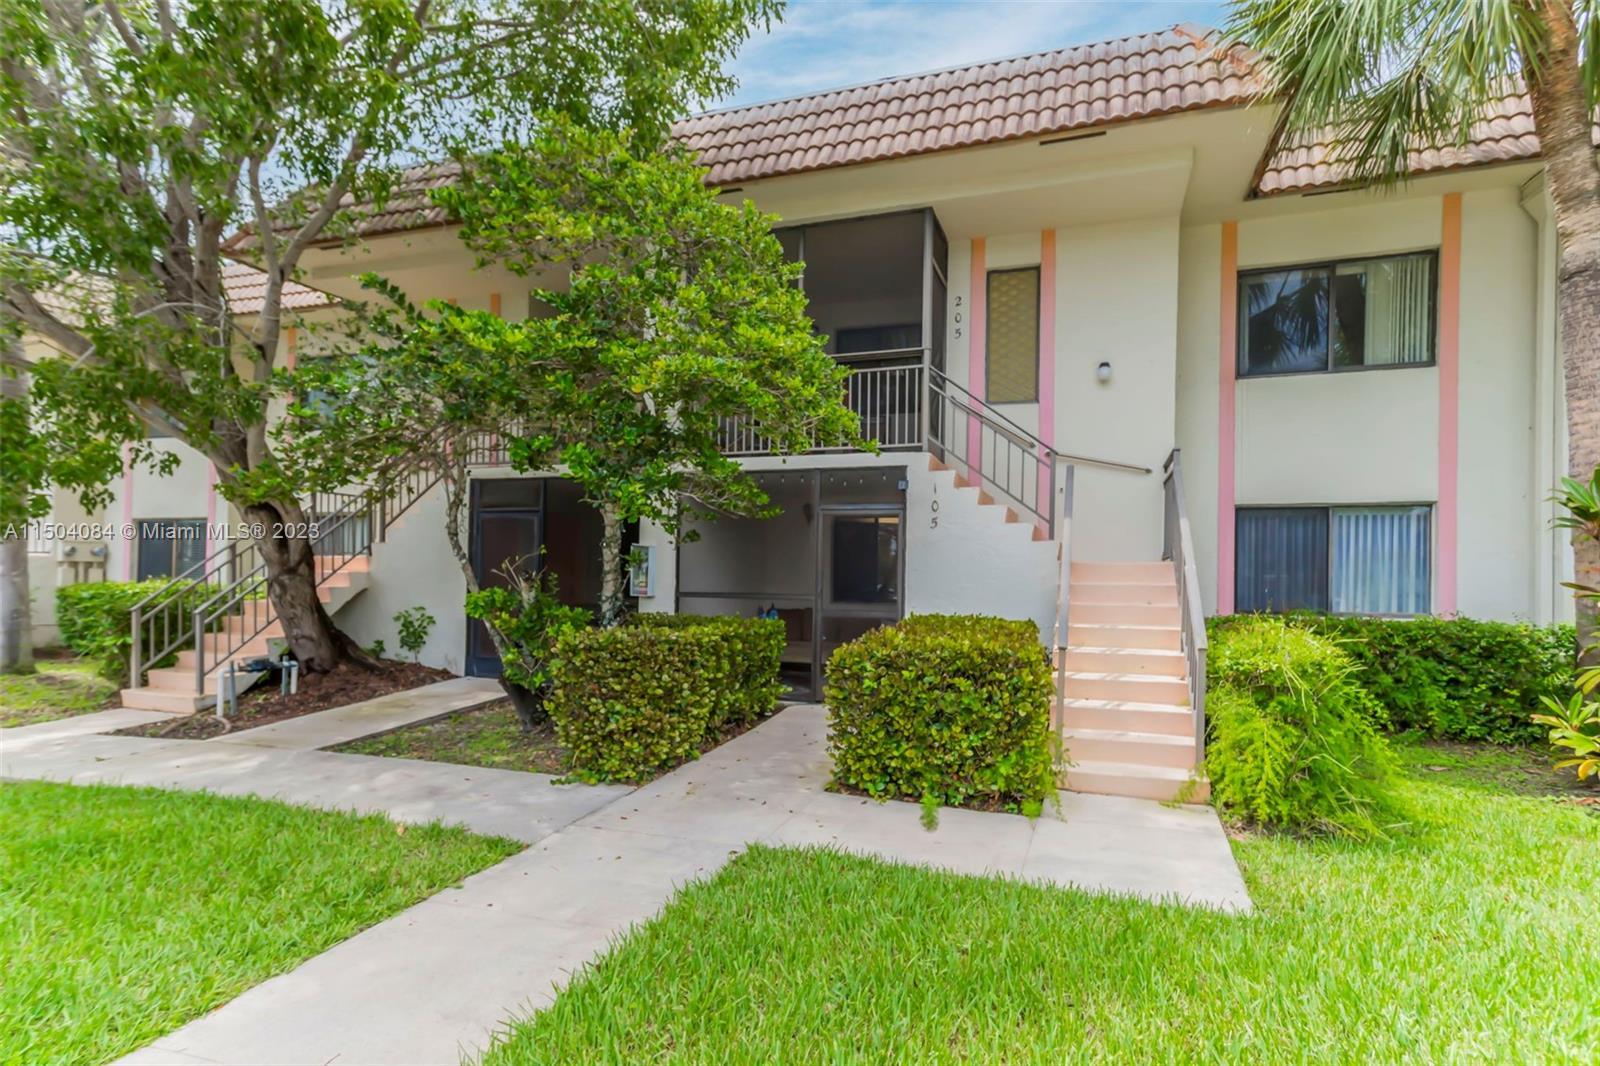 Photo of 401 Lakeview Dr #105 in Weston, FL